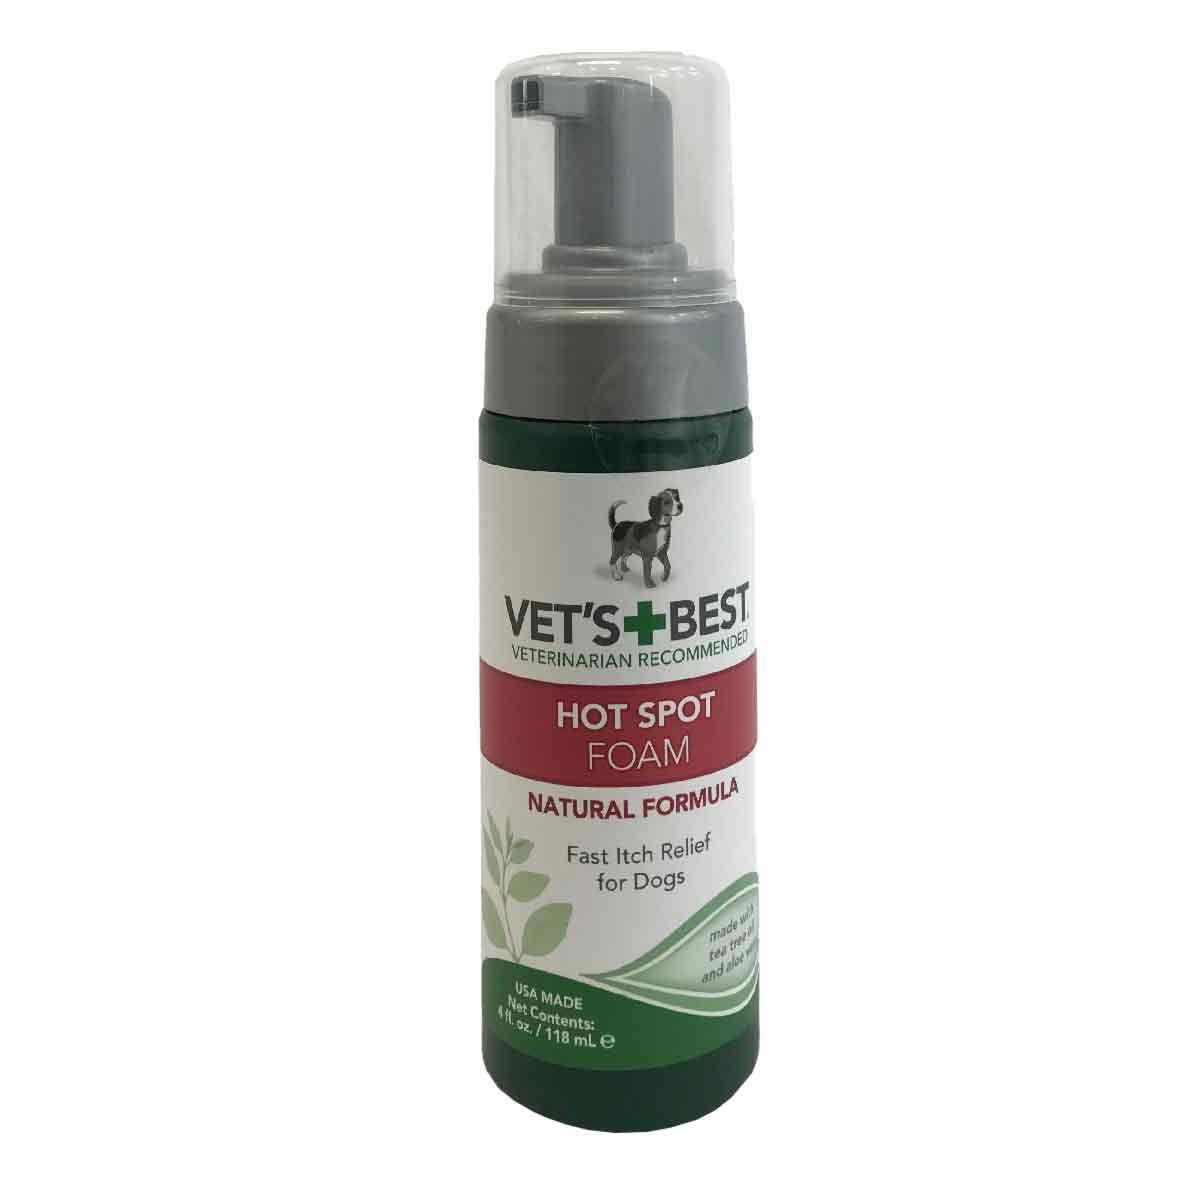 Quick Soothing Hot Spot Foam for Dogs from Vet's Best